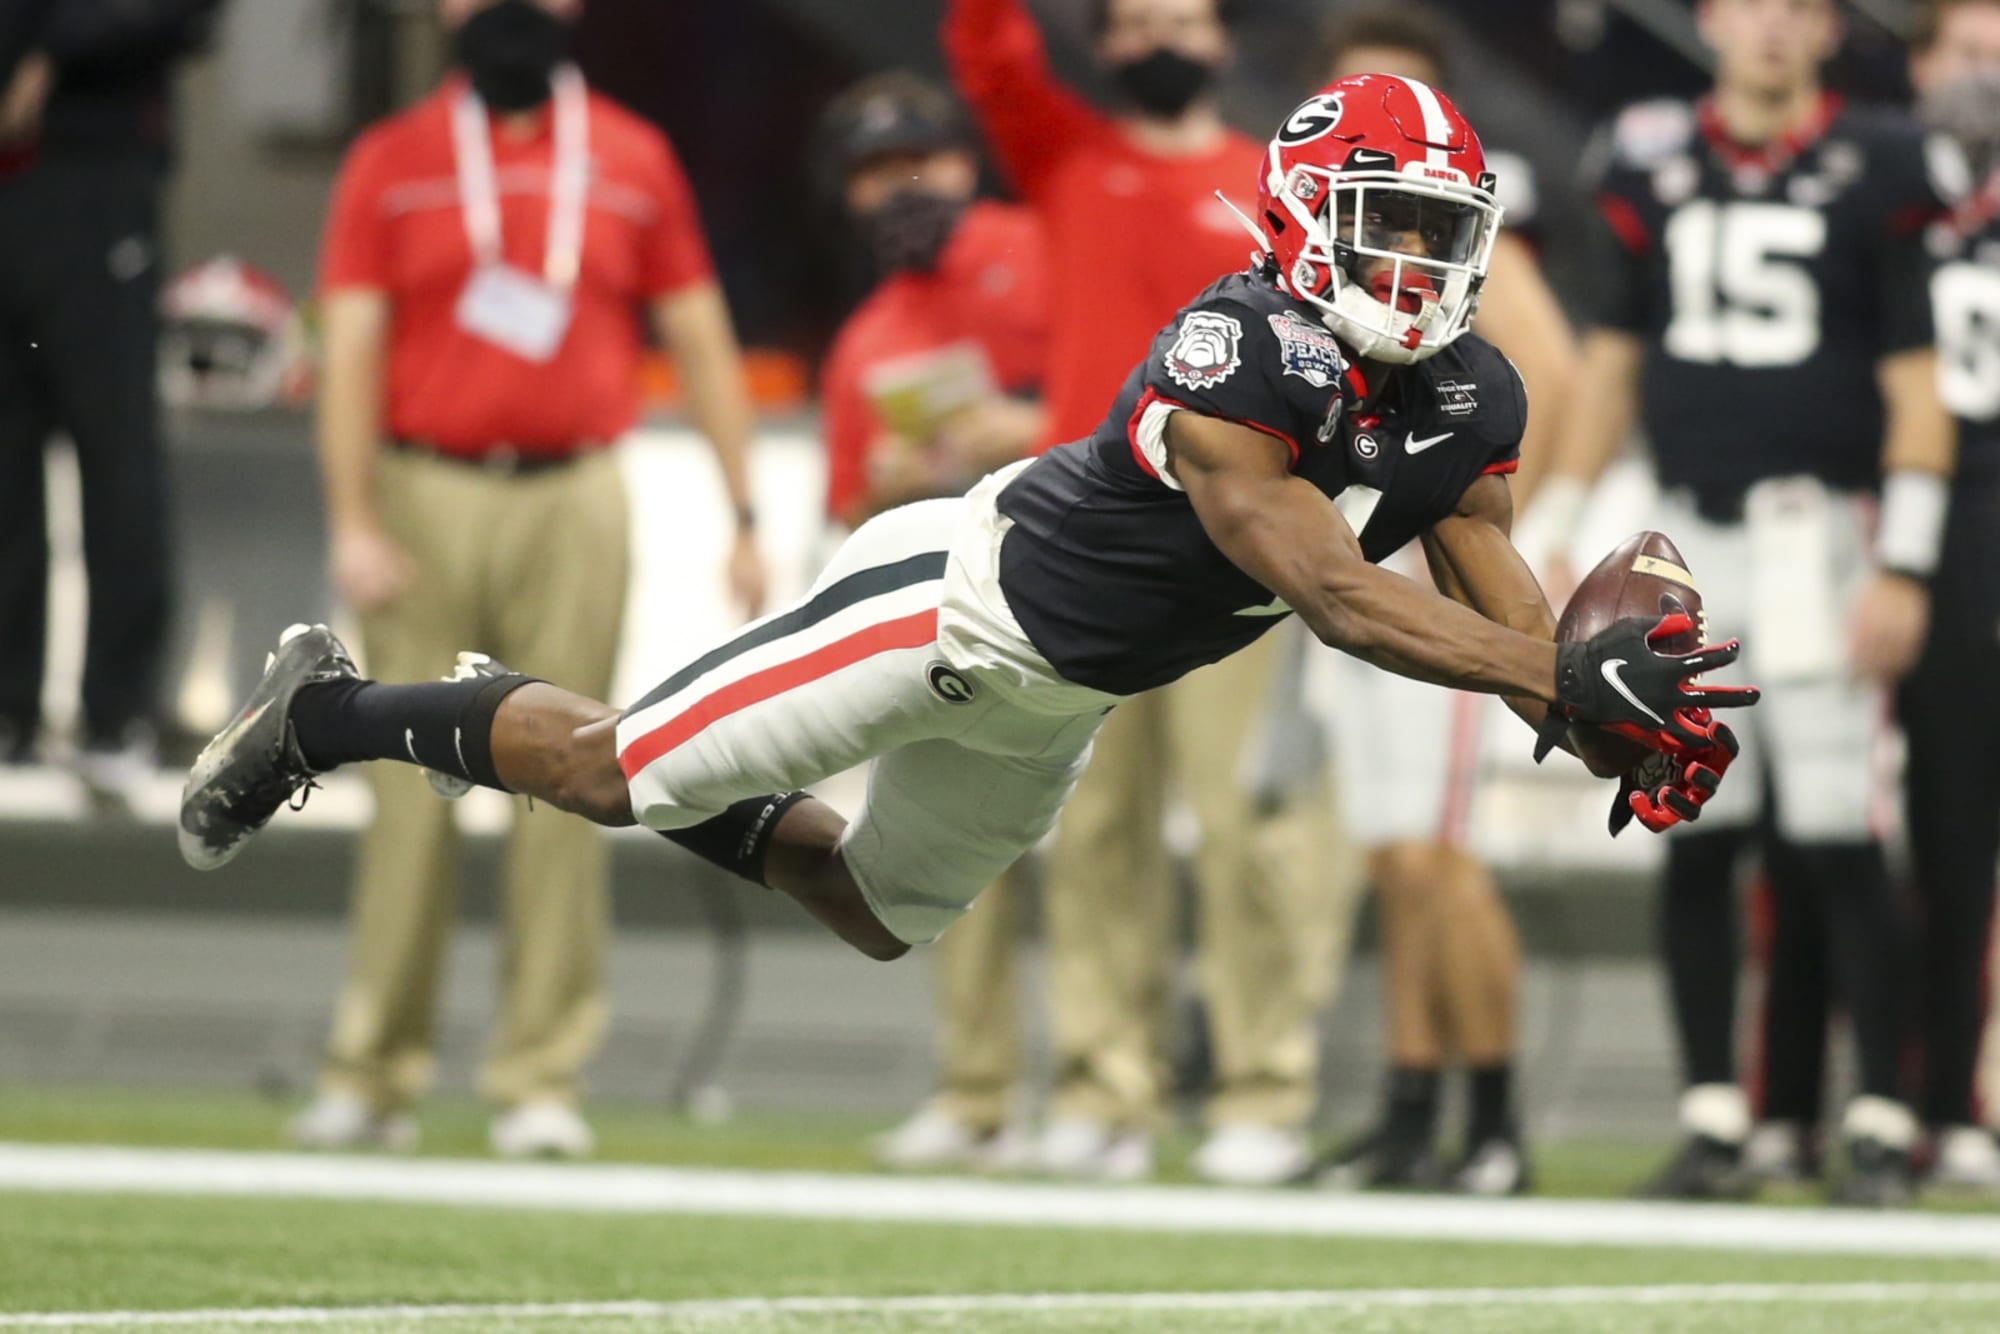 Georgia football: George Pickens is an interesting fit with Steelers - Dawn of the Dawg